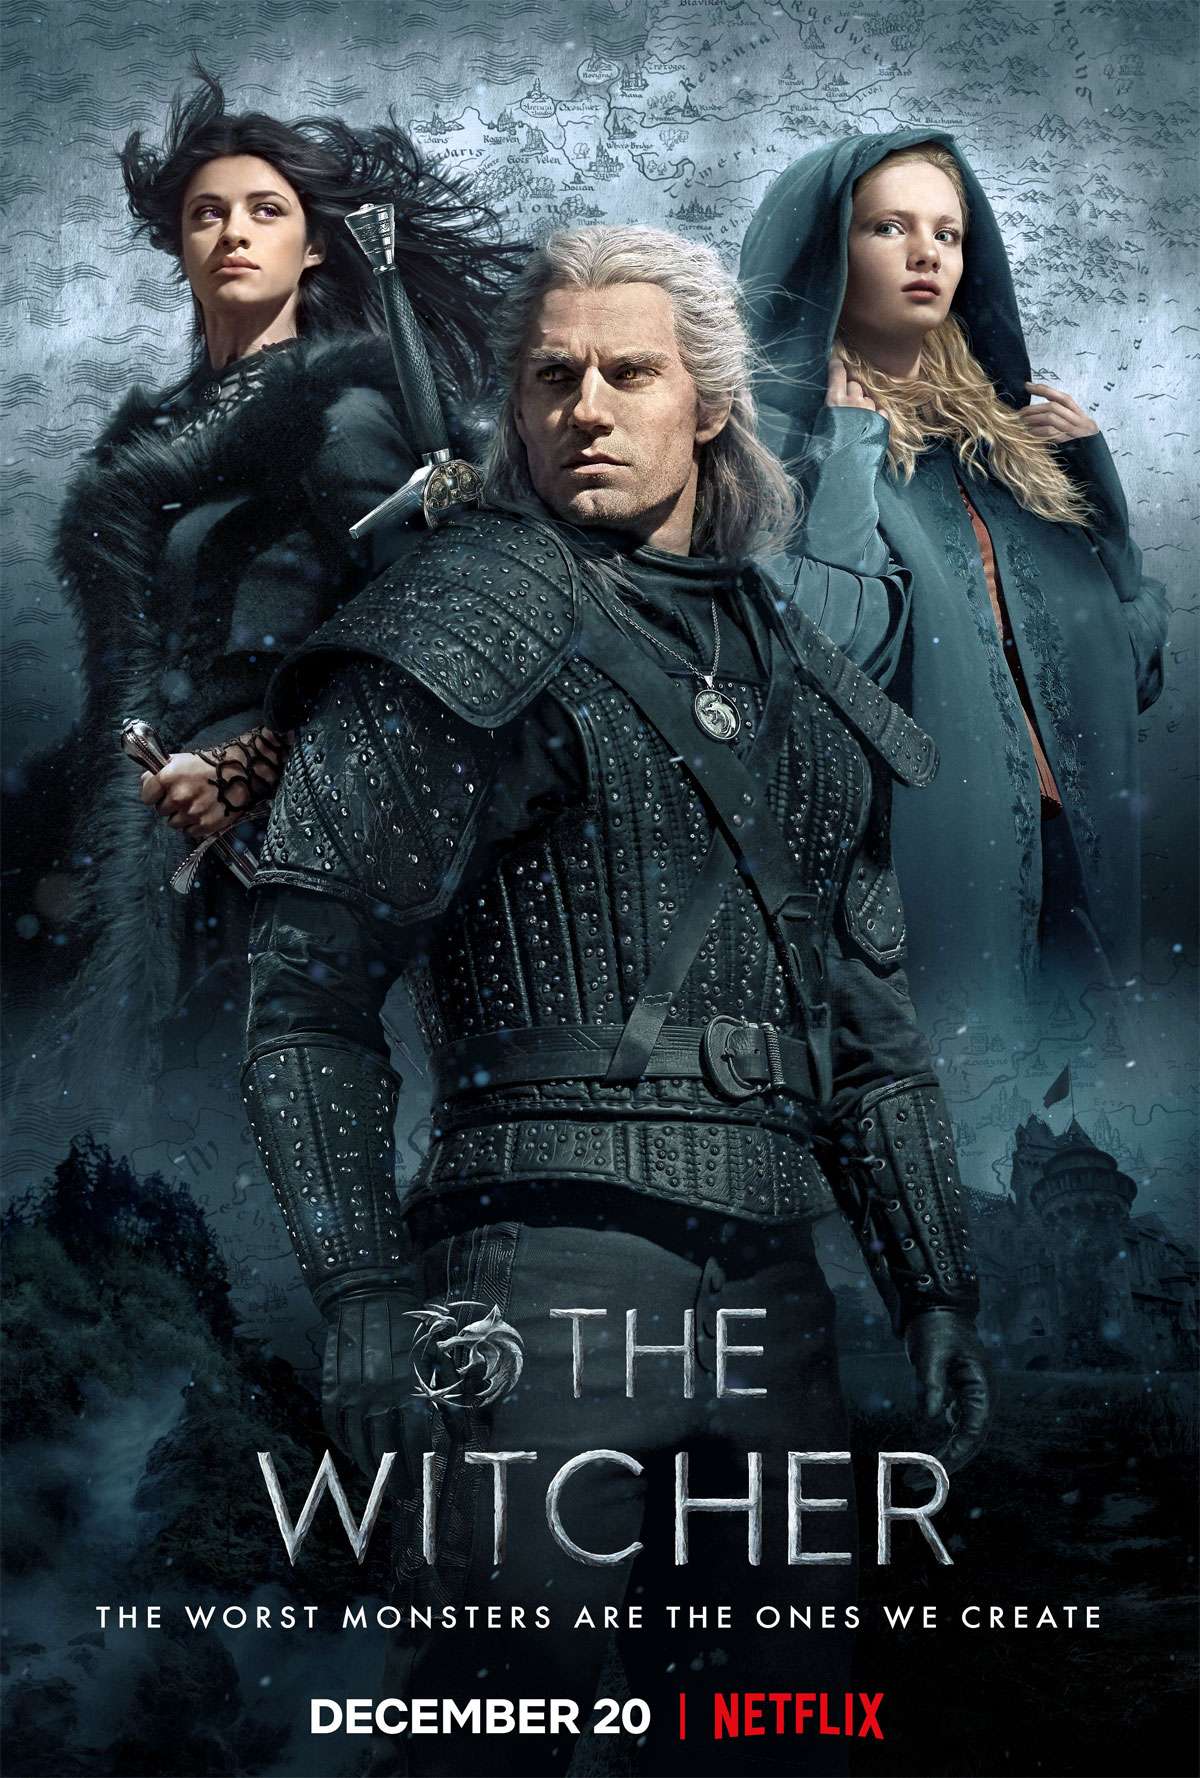 new-poster-for-netflix-s-the-witcher-puts-the-main-cast-front-and